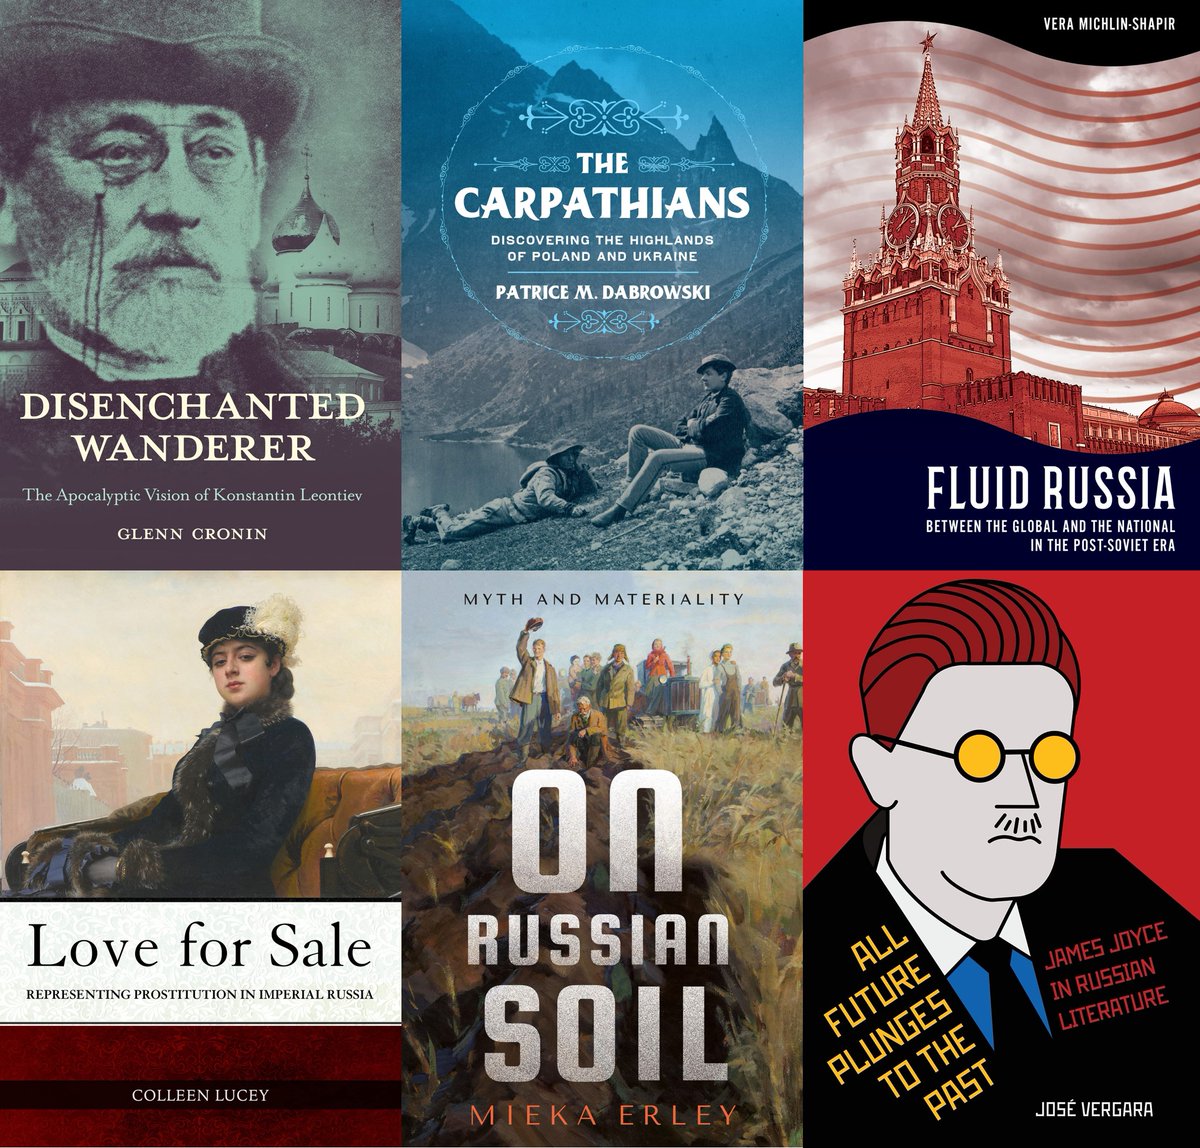 Fun fact: NIU Press is part of the @CornellPress family and publishes *superb* books in #SlavicStudies, #EurasianStudies, #EuropeanHistory, & #LiteraryCriticism. Check out the virtual #NIUP @aseeestudies booth (w/40% #ASEEES21 discount & free US shipping): cornellpress.cornell.edu/our-niup-only-…